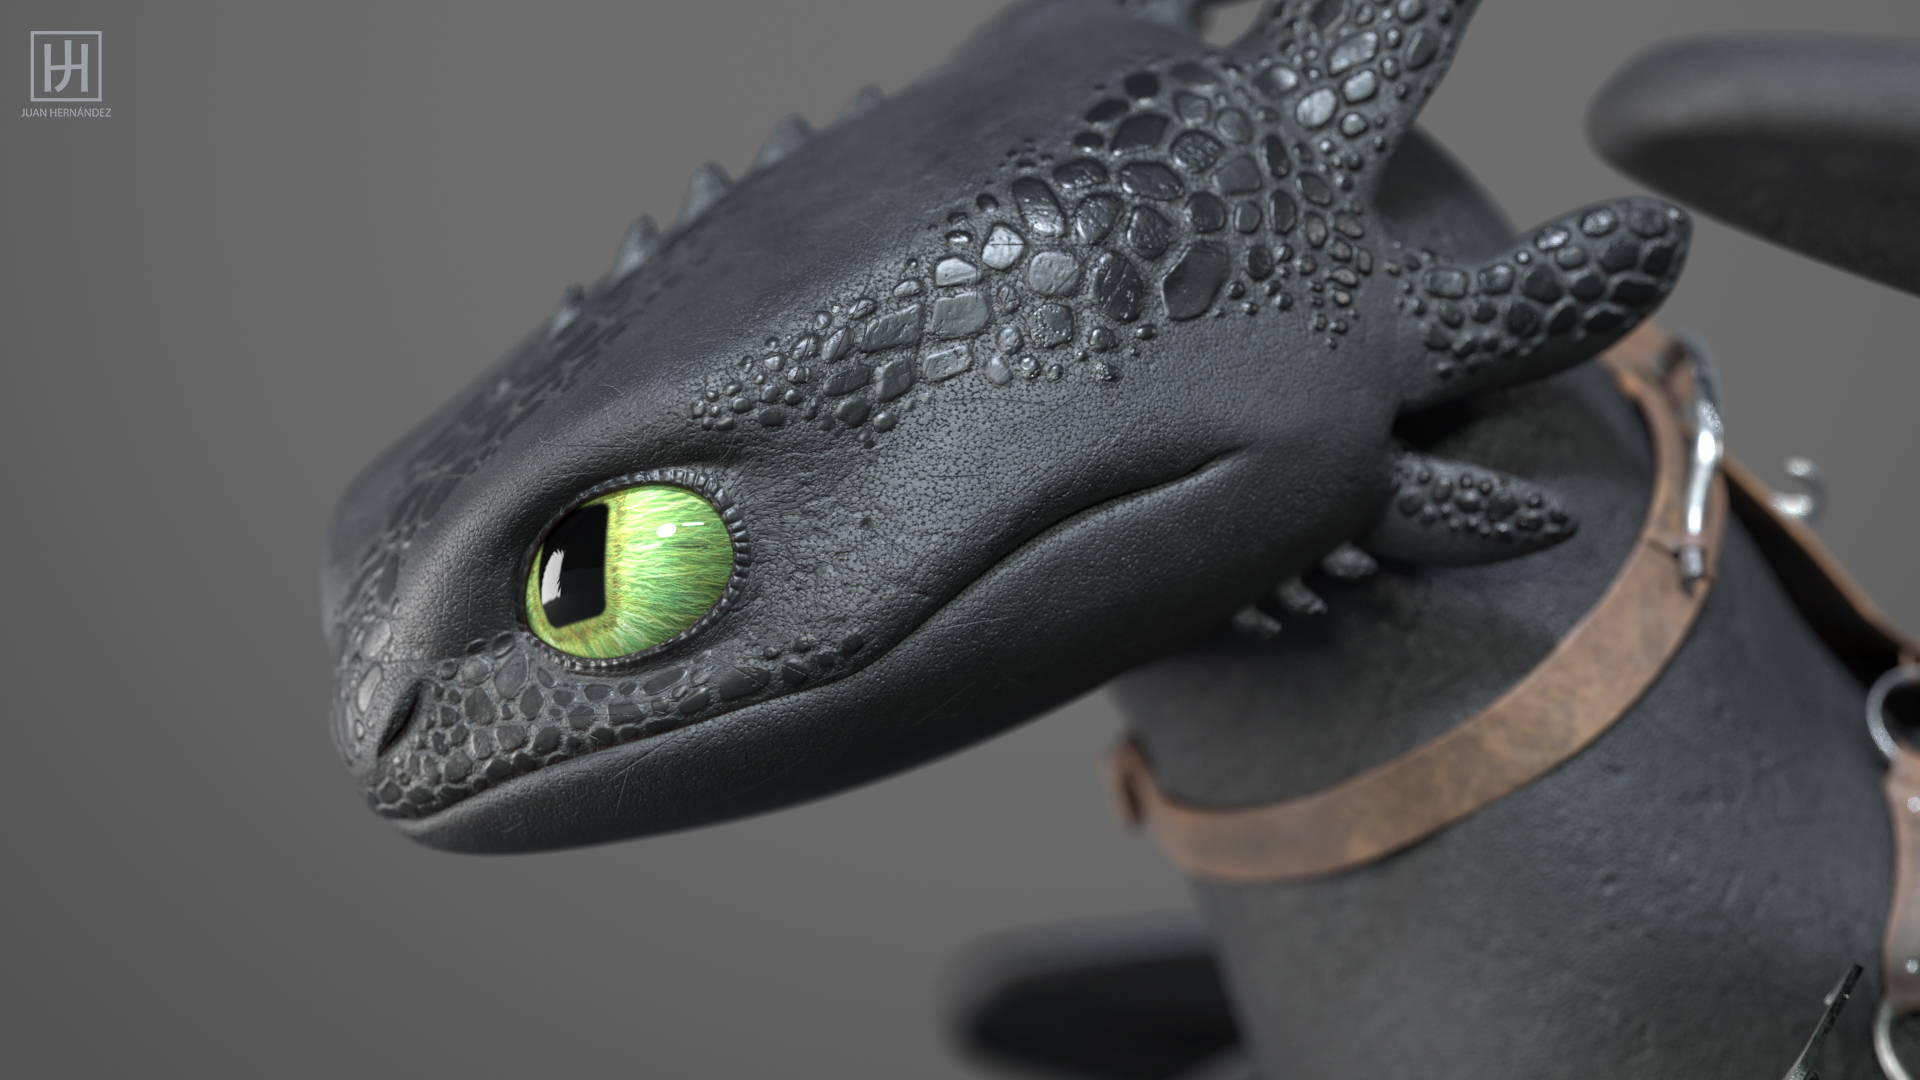 Toothless How To Train Your Dragon Finished Projects Blender Artists Community